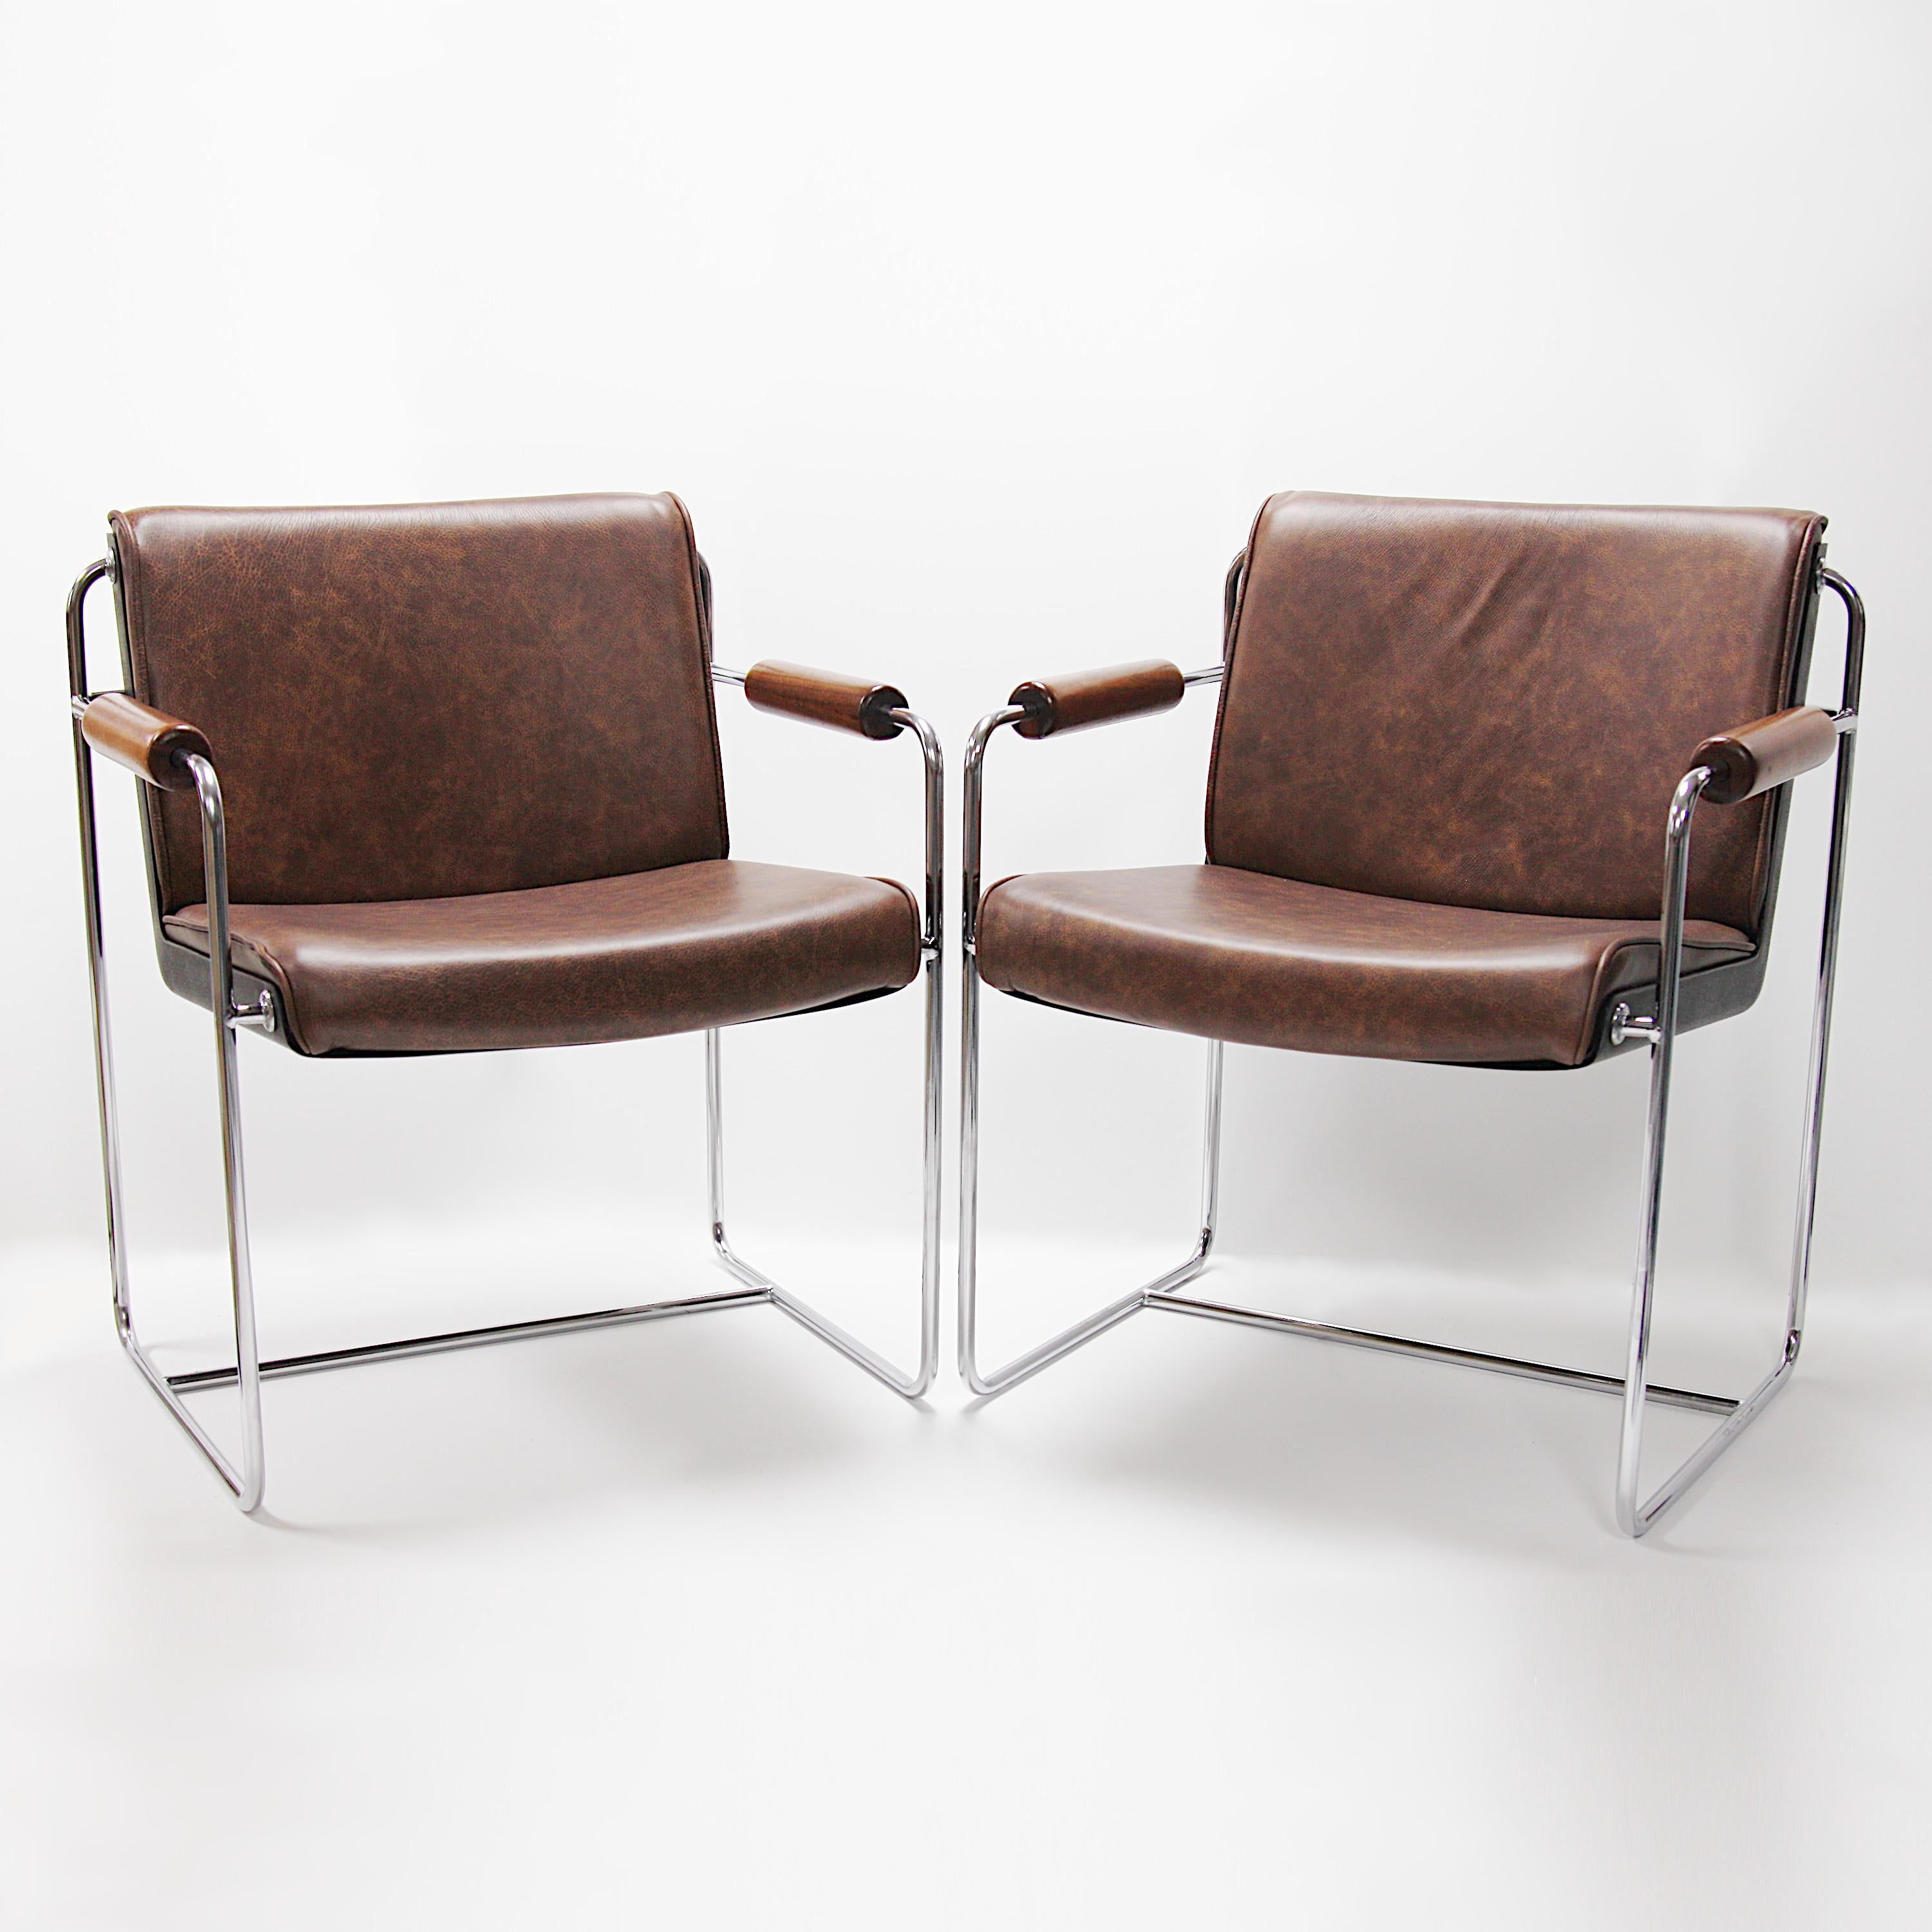 Rare Pair of Mid-Century Modern Fiberglass and Brown Leather Shell Lounge Chairs In Excellent Condition For Sale In Lafayette, IN